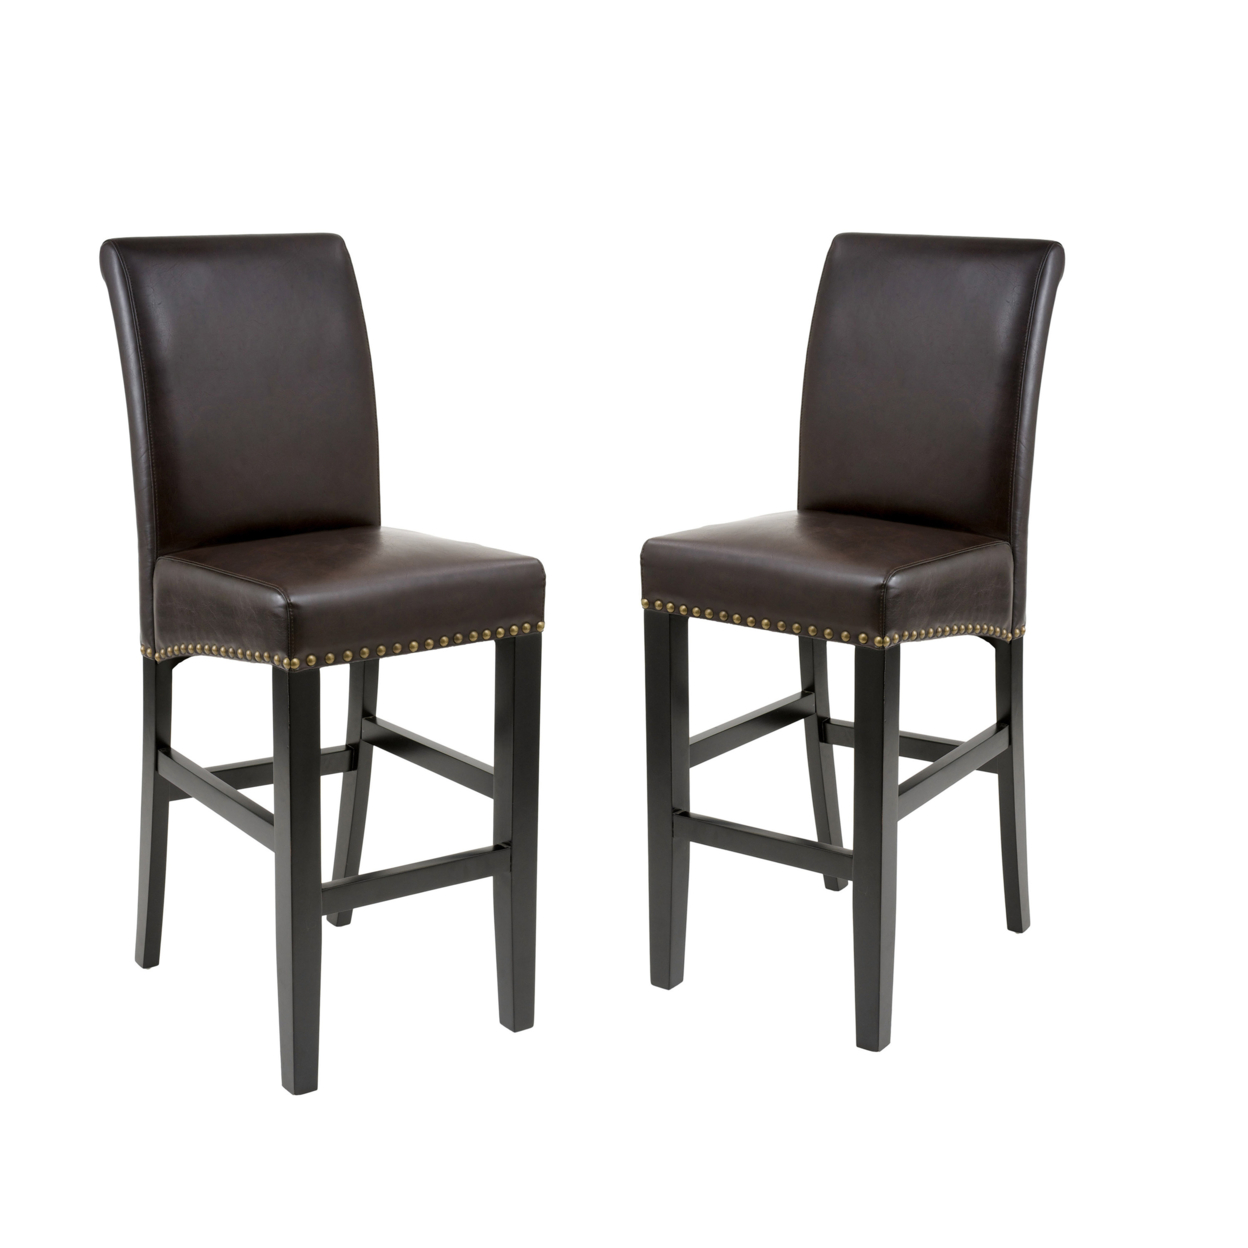 Clifton 30-Inch Brown Leather Bar Stool (Set Of 2)